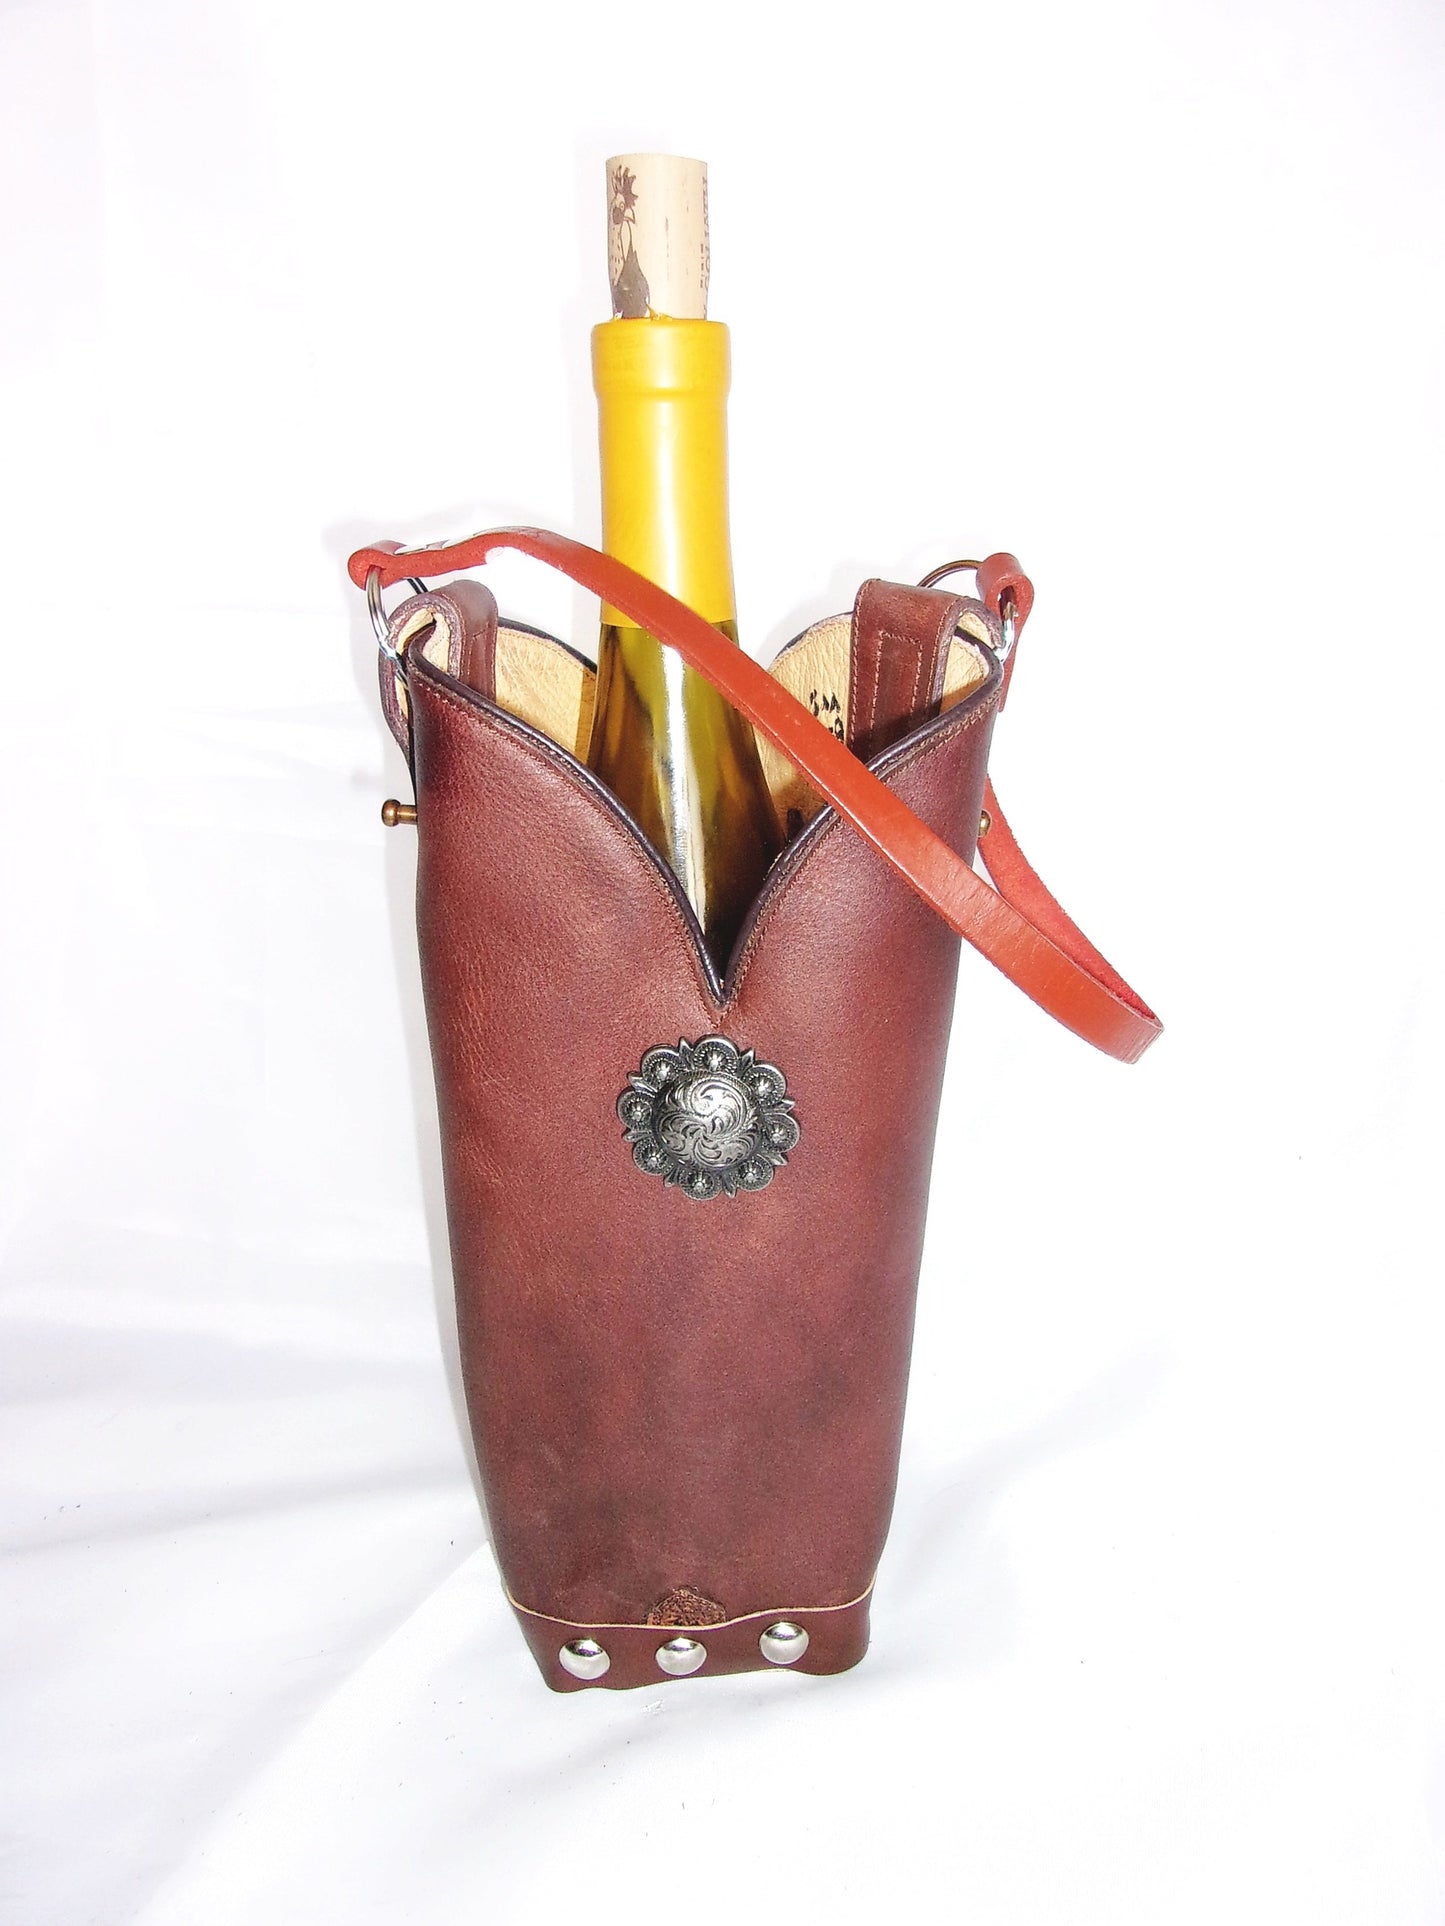 Cowboy Boot Wine Tote wt539 handcrafted from cowboy boots. Shop all unique leather western handbags, purses and totes at Chris Thompson Bags